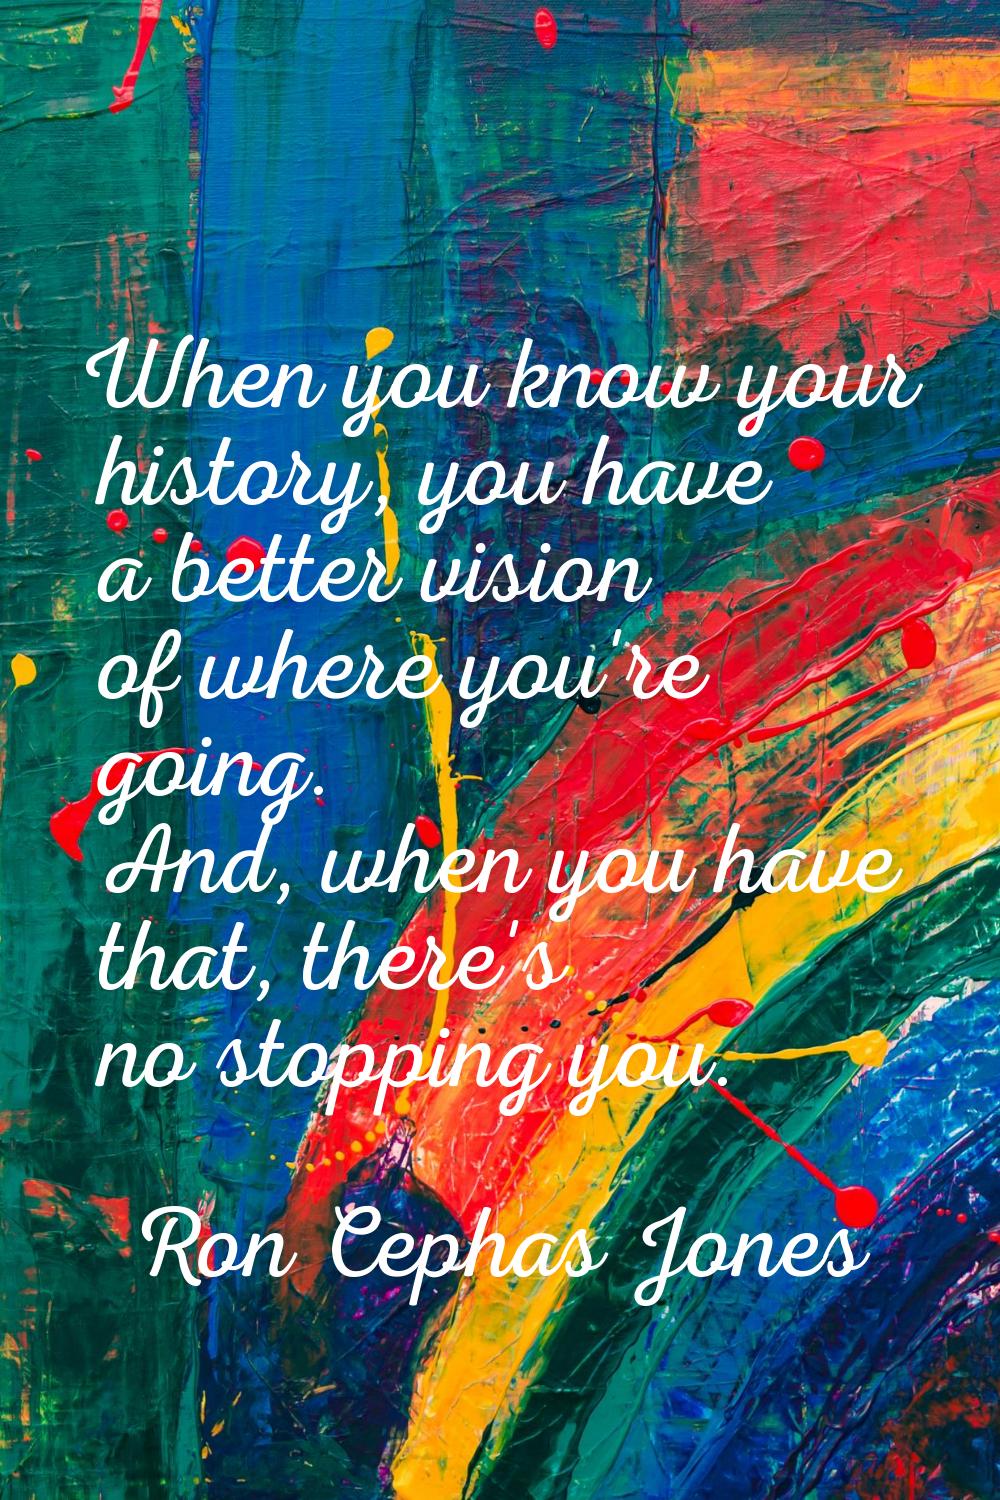 When you know your history, you have a better vision of where you're going. And, when you have that